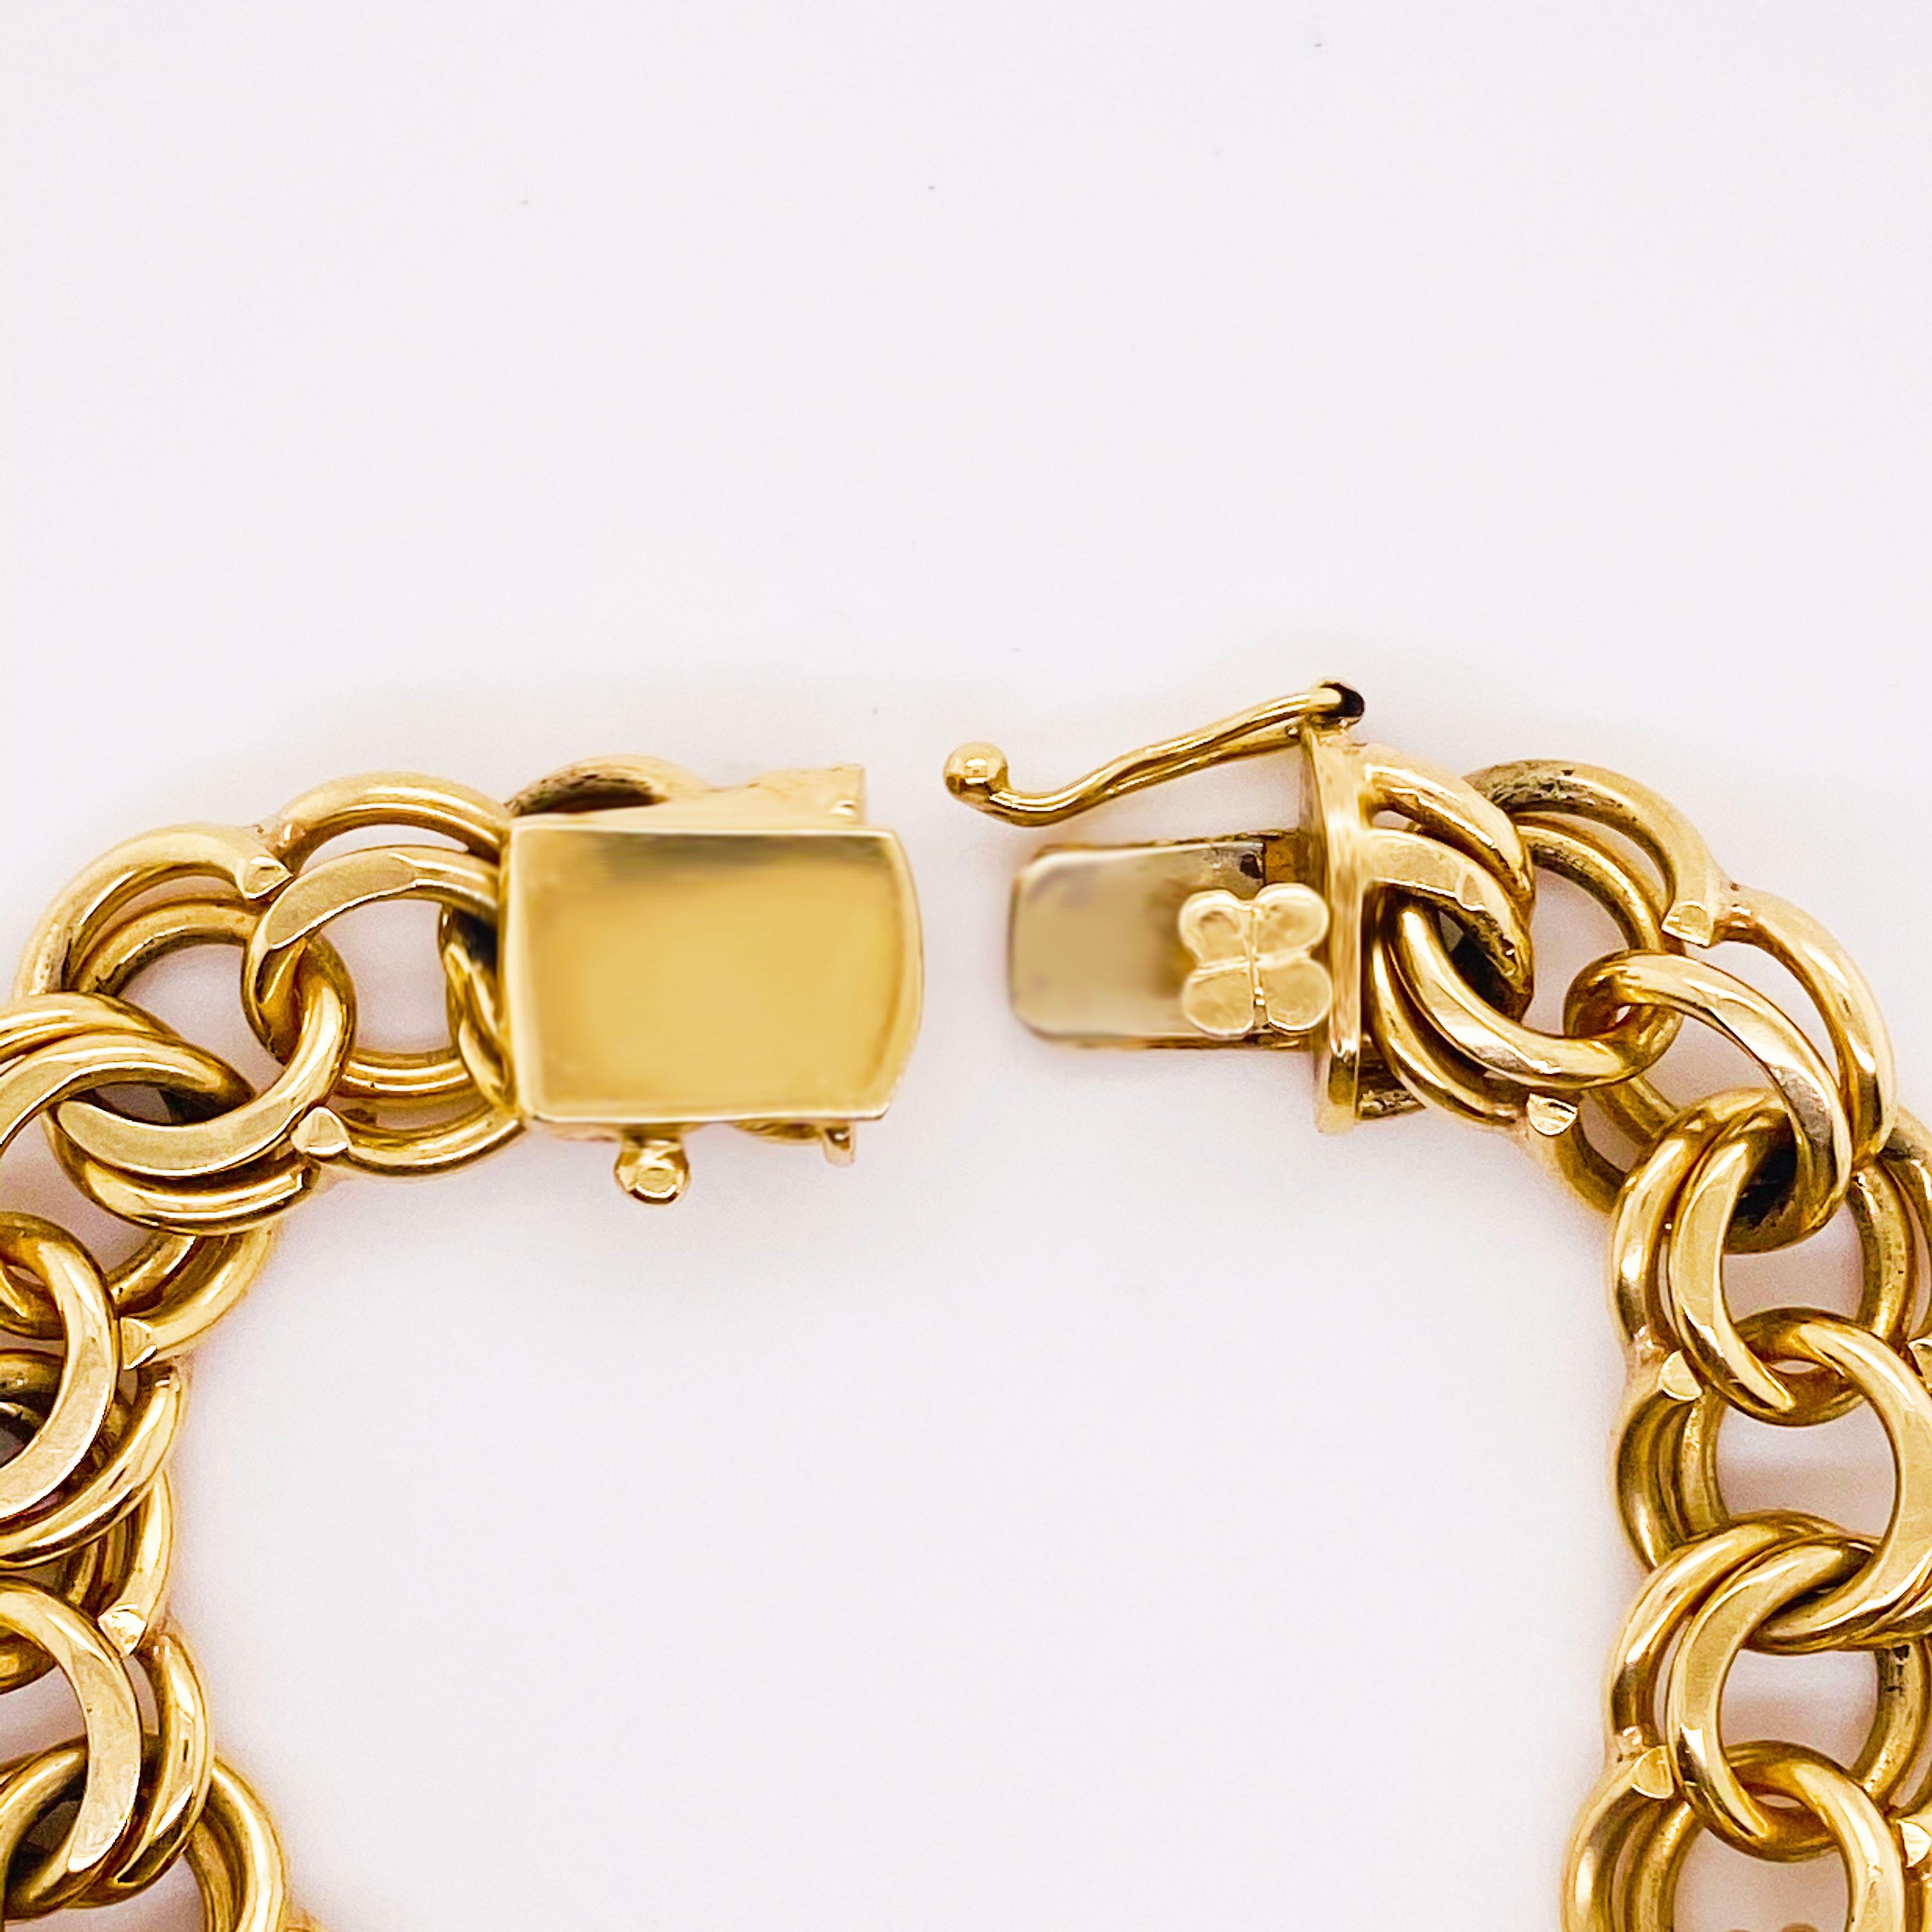 This 14 karat yellow gold charm bracelet is so RETRO!  It is one of the widest that I have ever seen at 12 milometers!  Originating from Rhode Island, this charm bracelet was designs so that you can wear the extra large charms on it! These are the